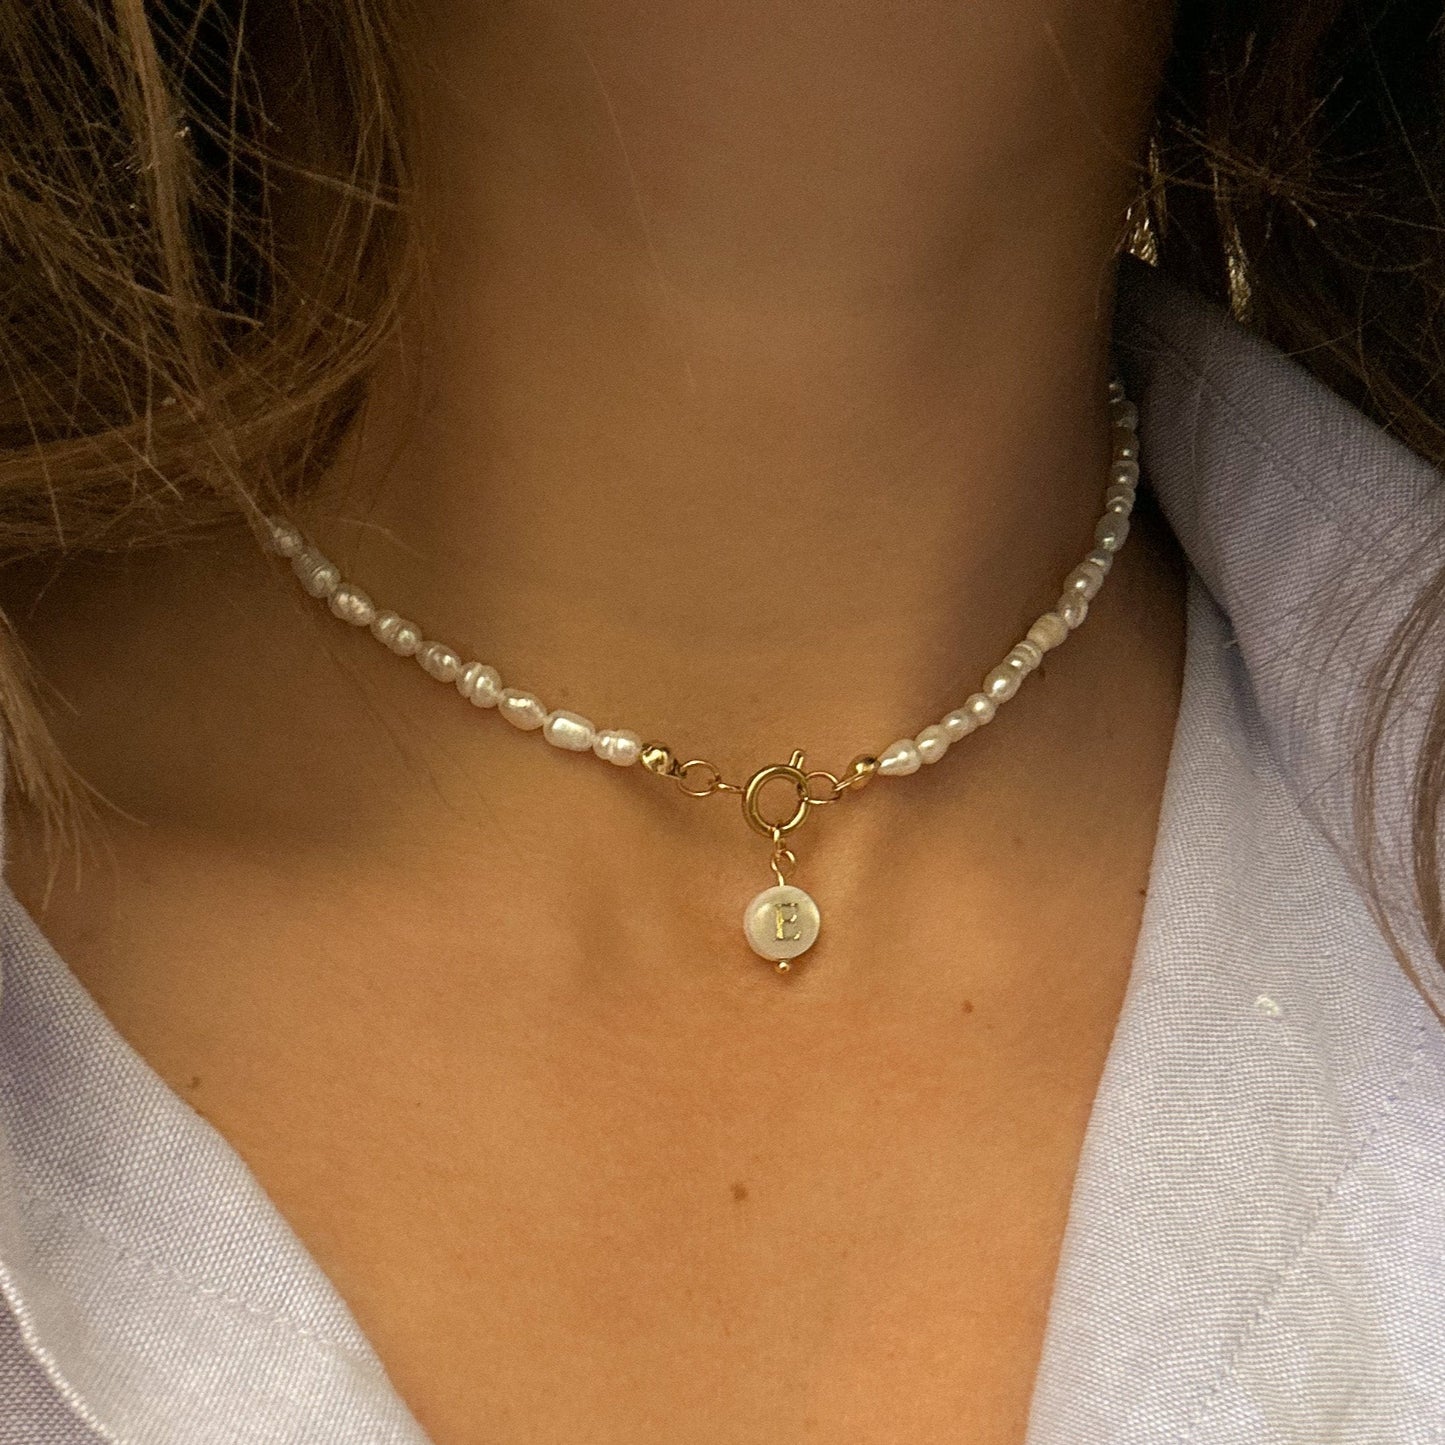 Personalized Pearl necklace with Letter